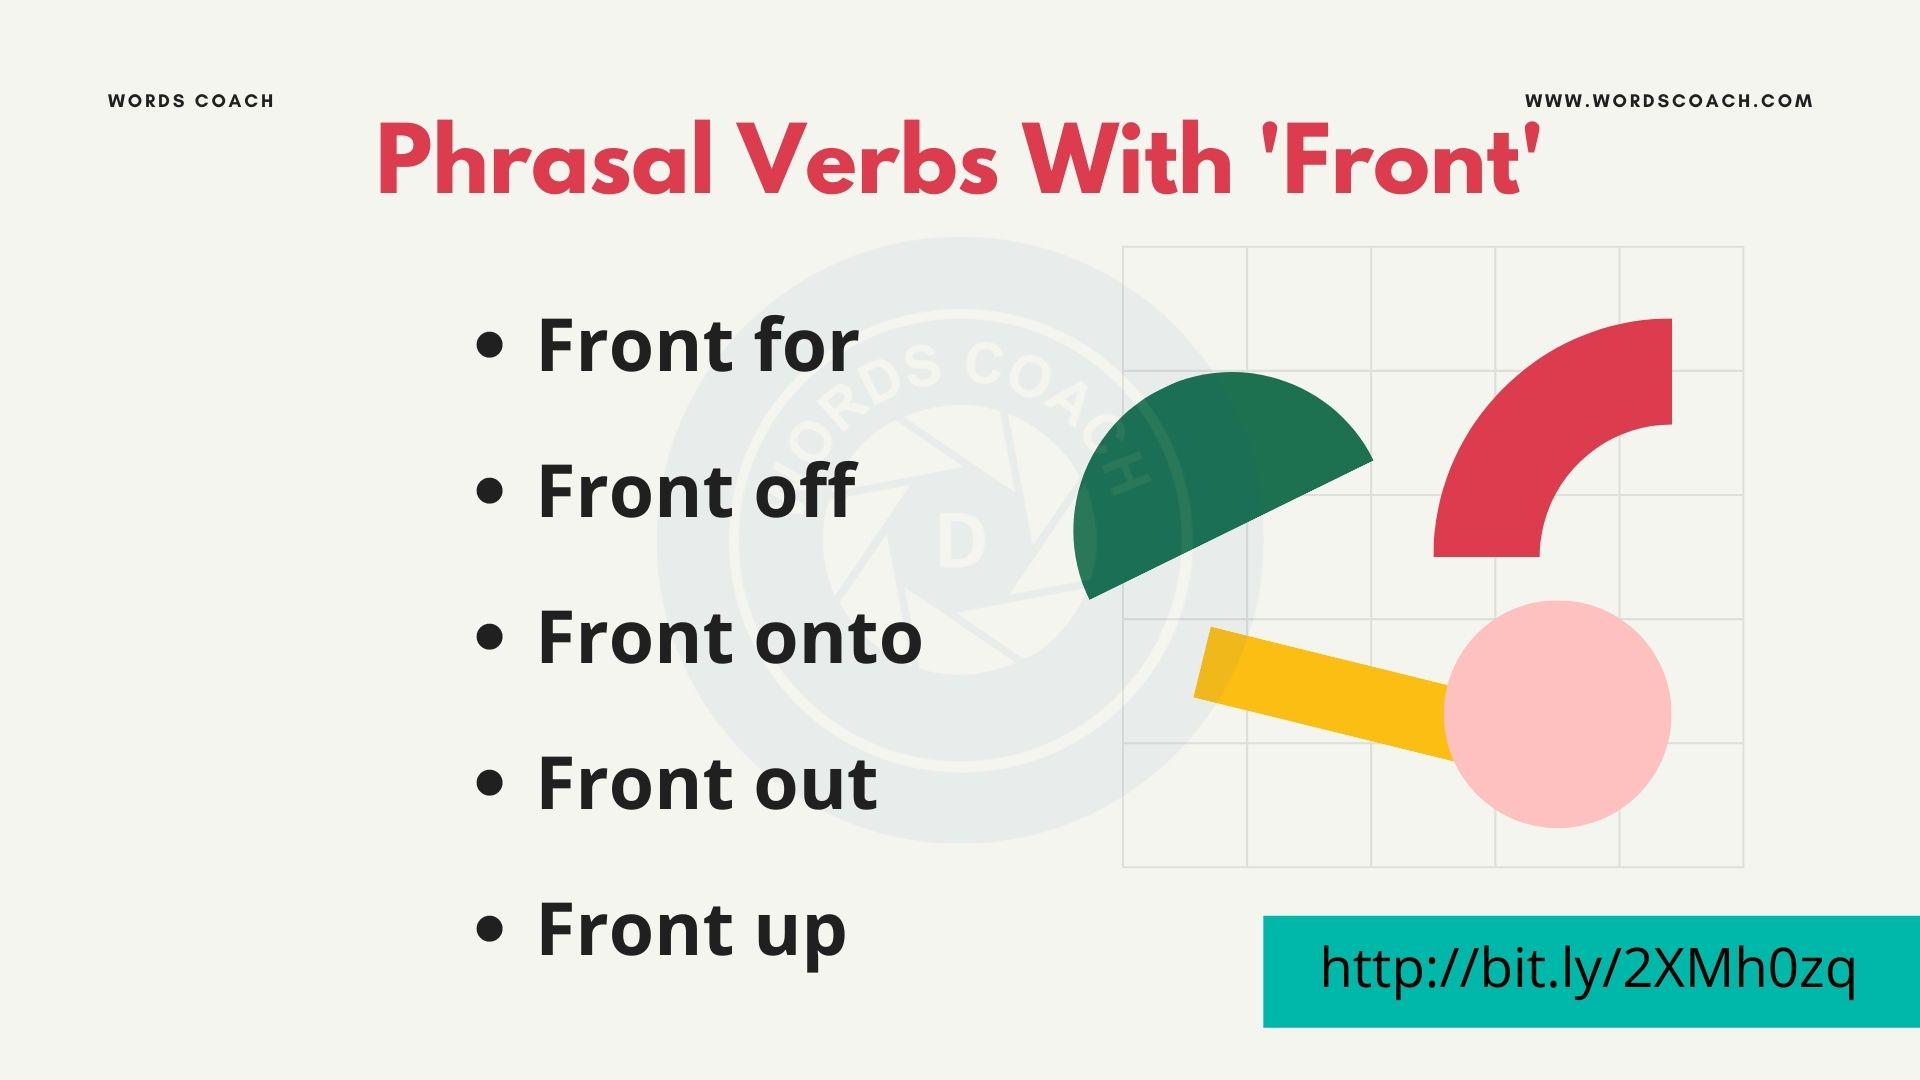 Phrasal Verbs With 'Front' - wordscoach.com